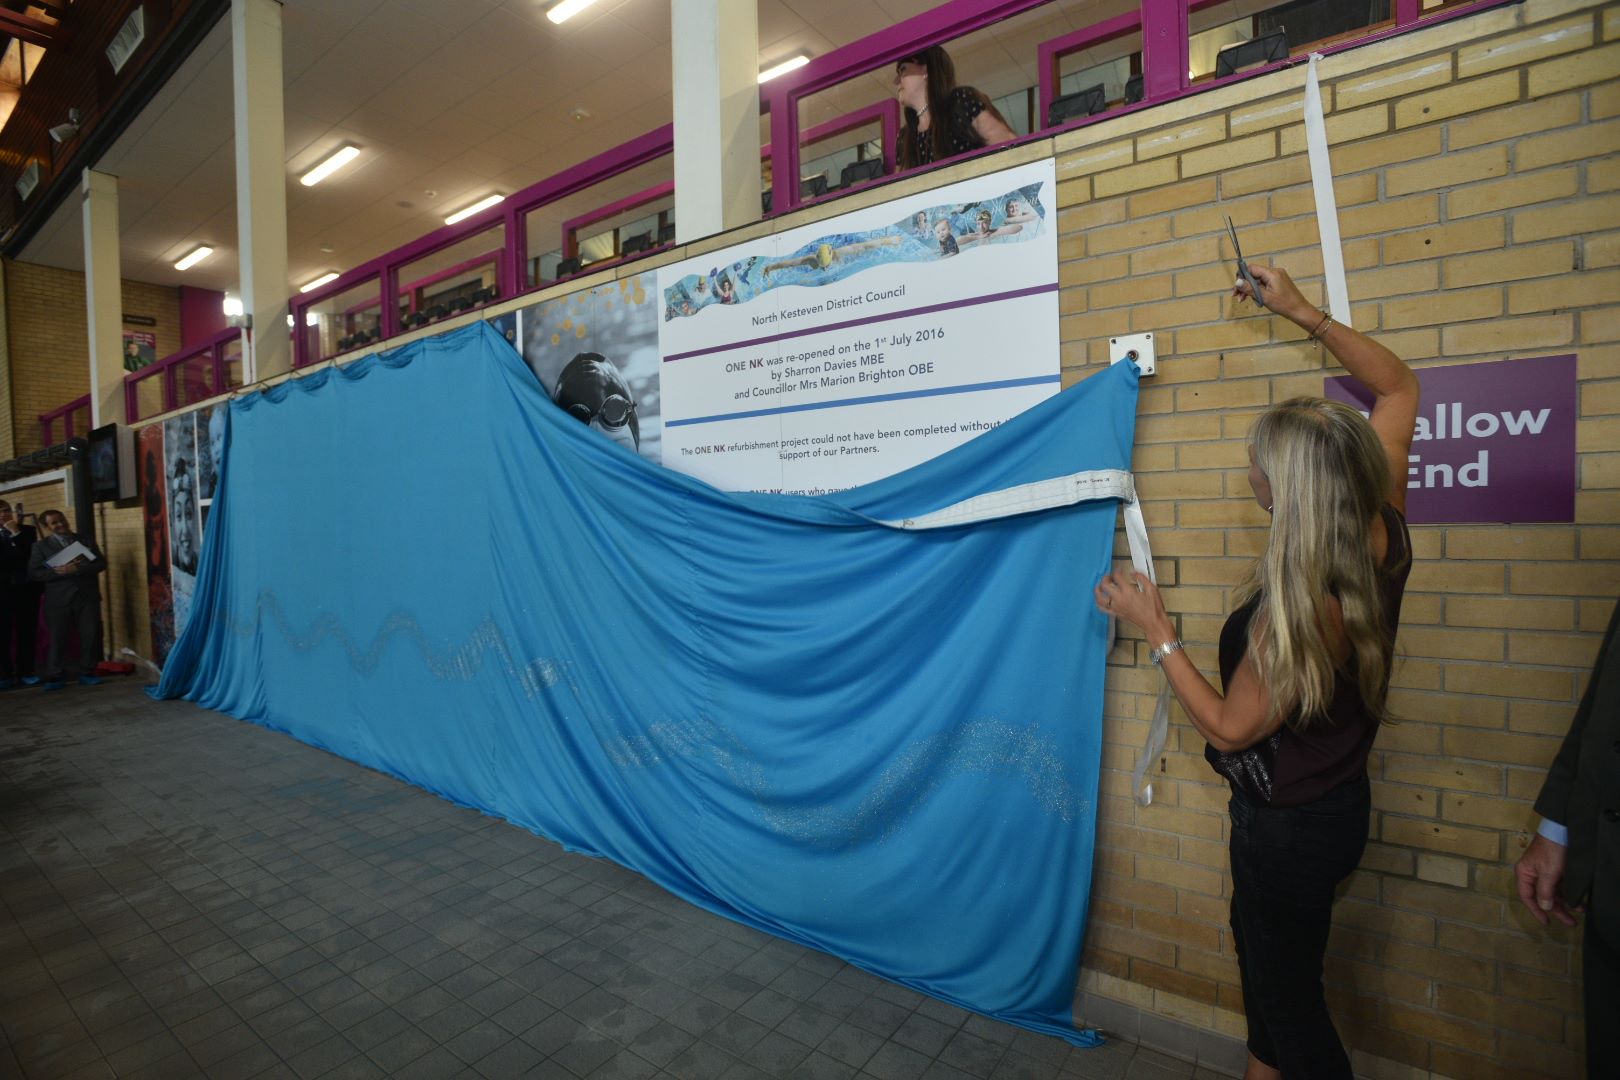 Sharron Davies unveiled the new signage in the swimming area of the new centre. Photo: Steve Smailes for The Lincolnite